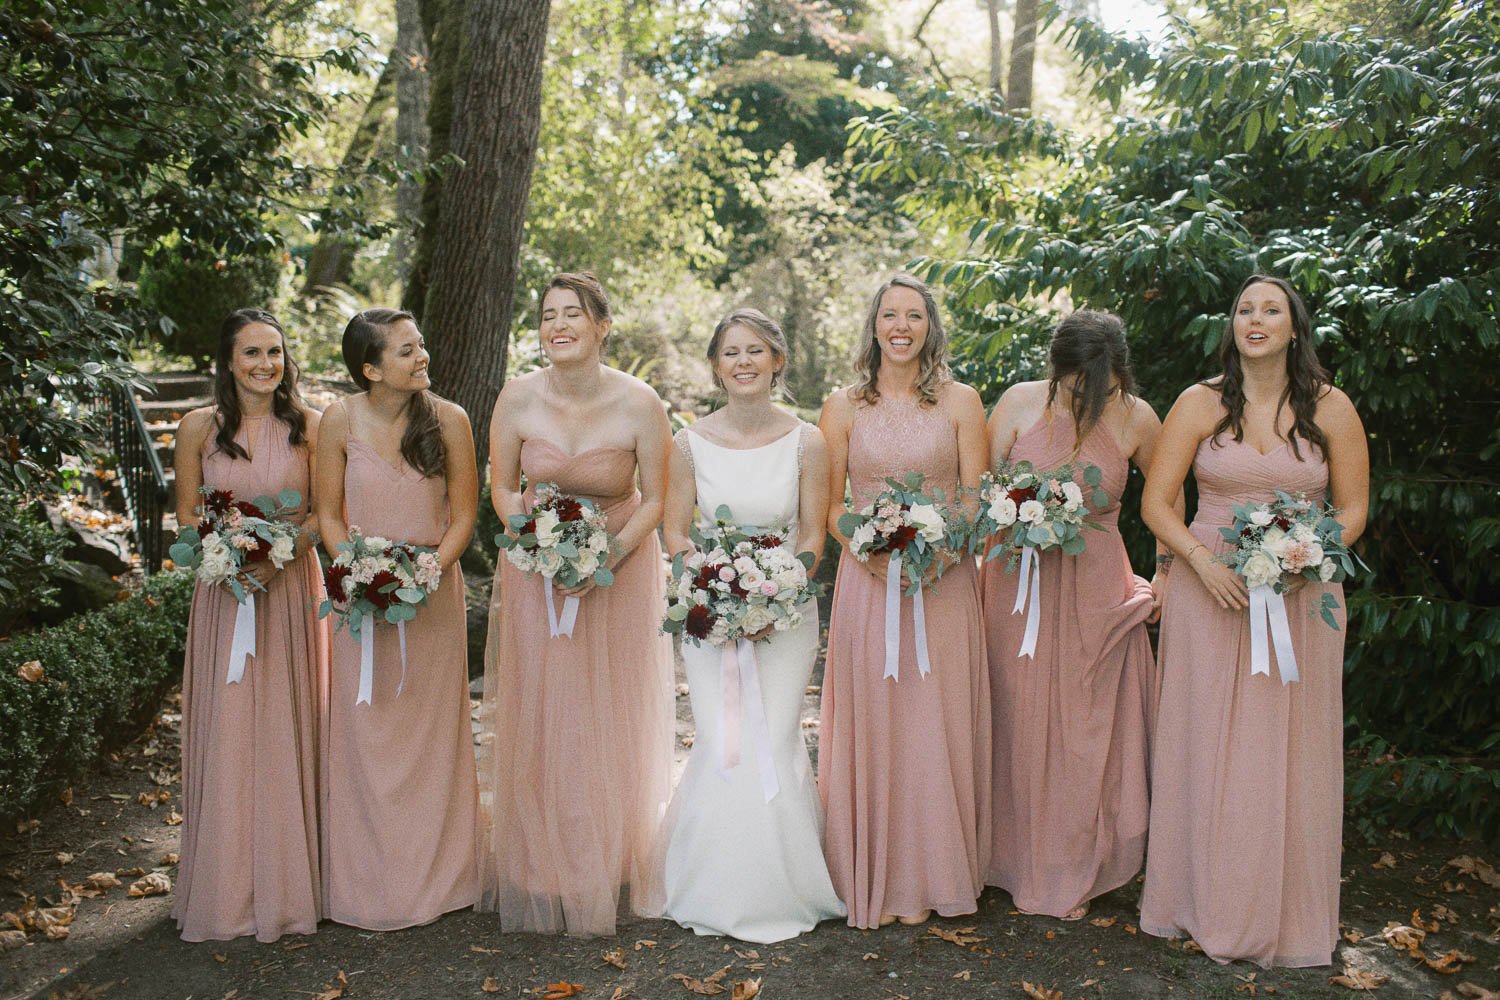  bride in white dress and six bridesmaids in blush pink dresses stand next to each other and laugh while holding bouquets of white and red flowers 